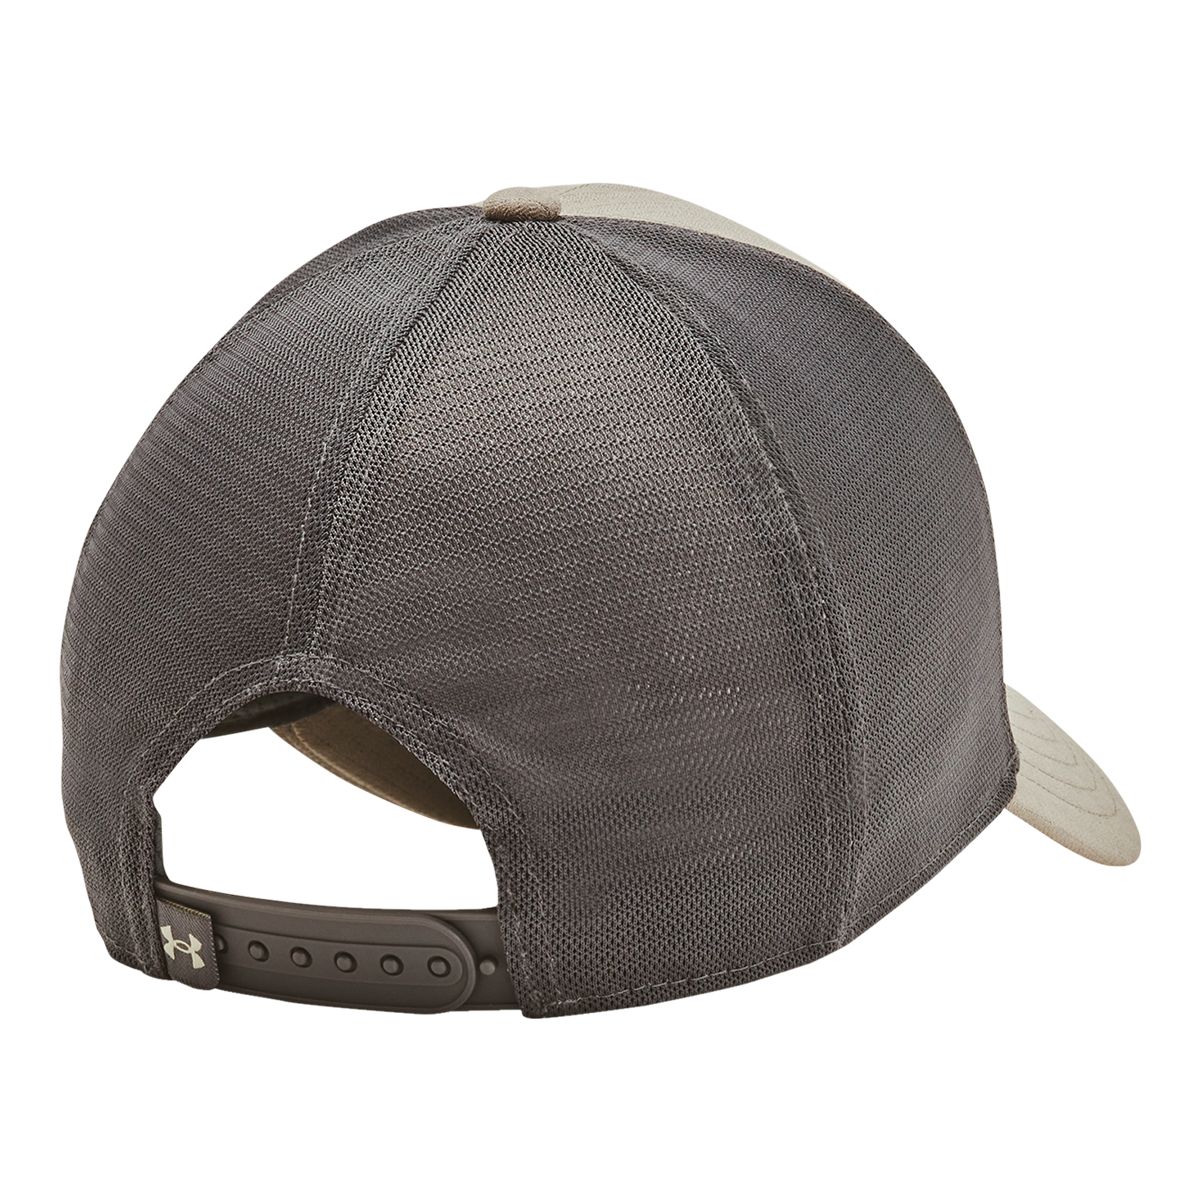 Under Armour Men's Iso-Chill ArmourVent™ Trucker Hat